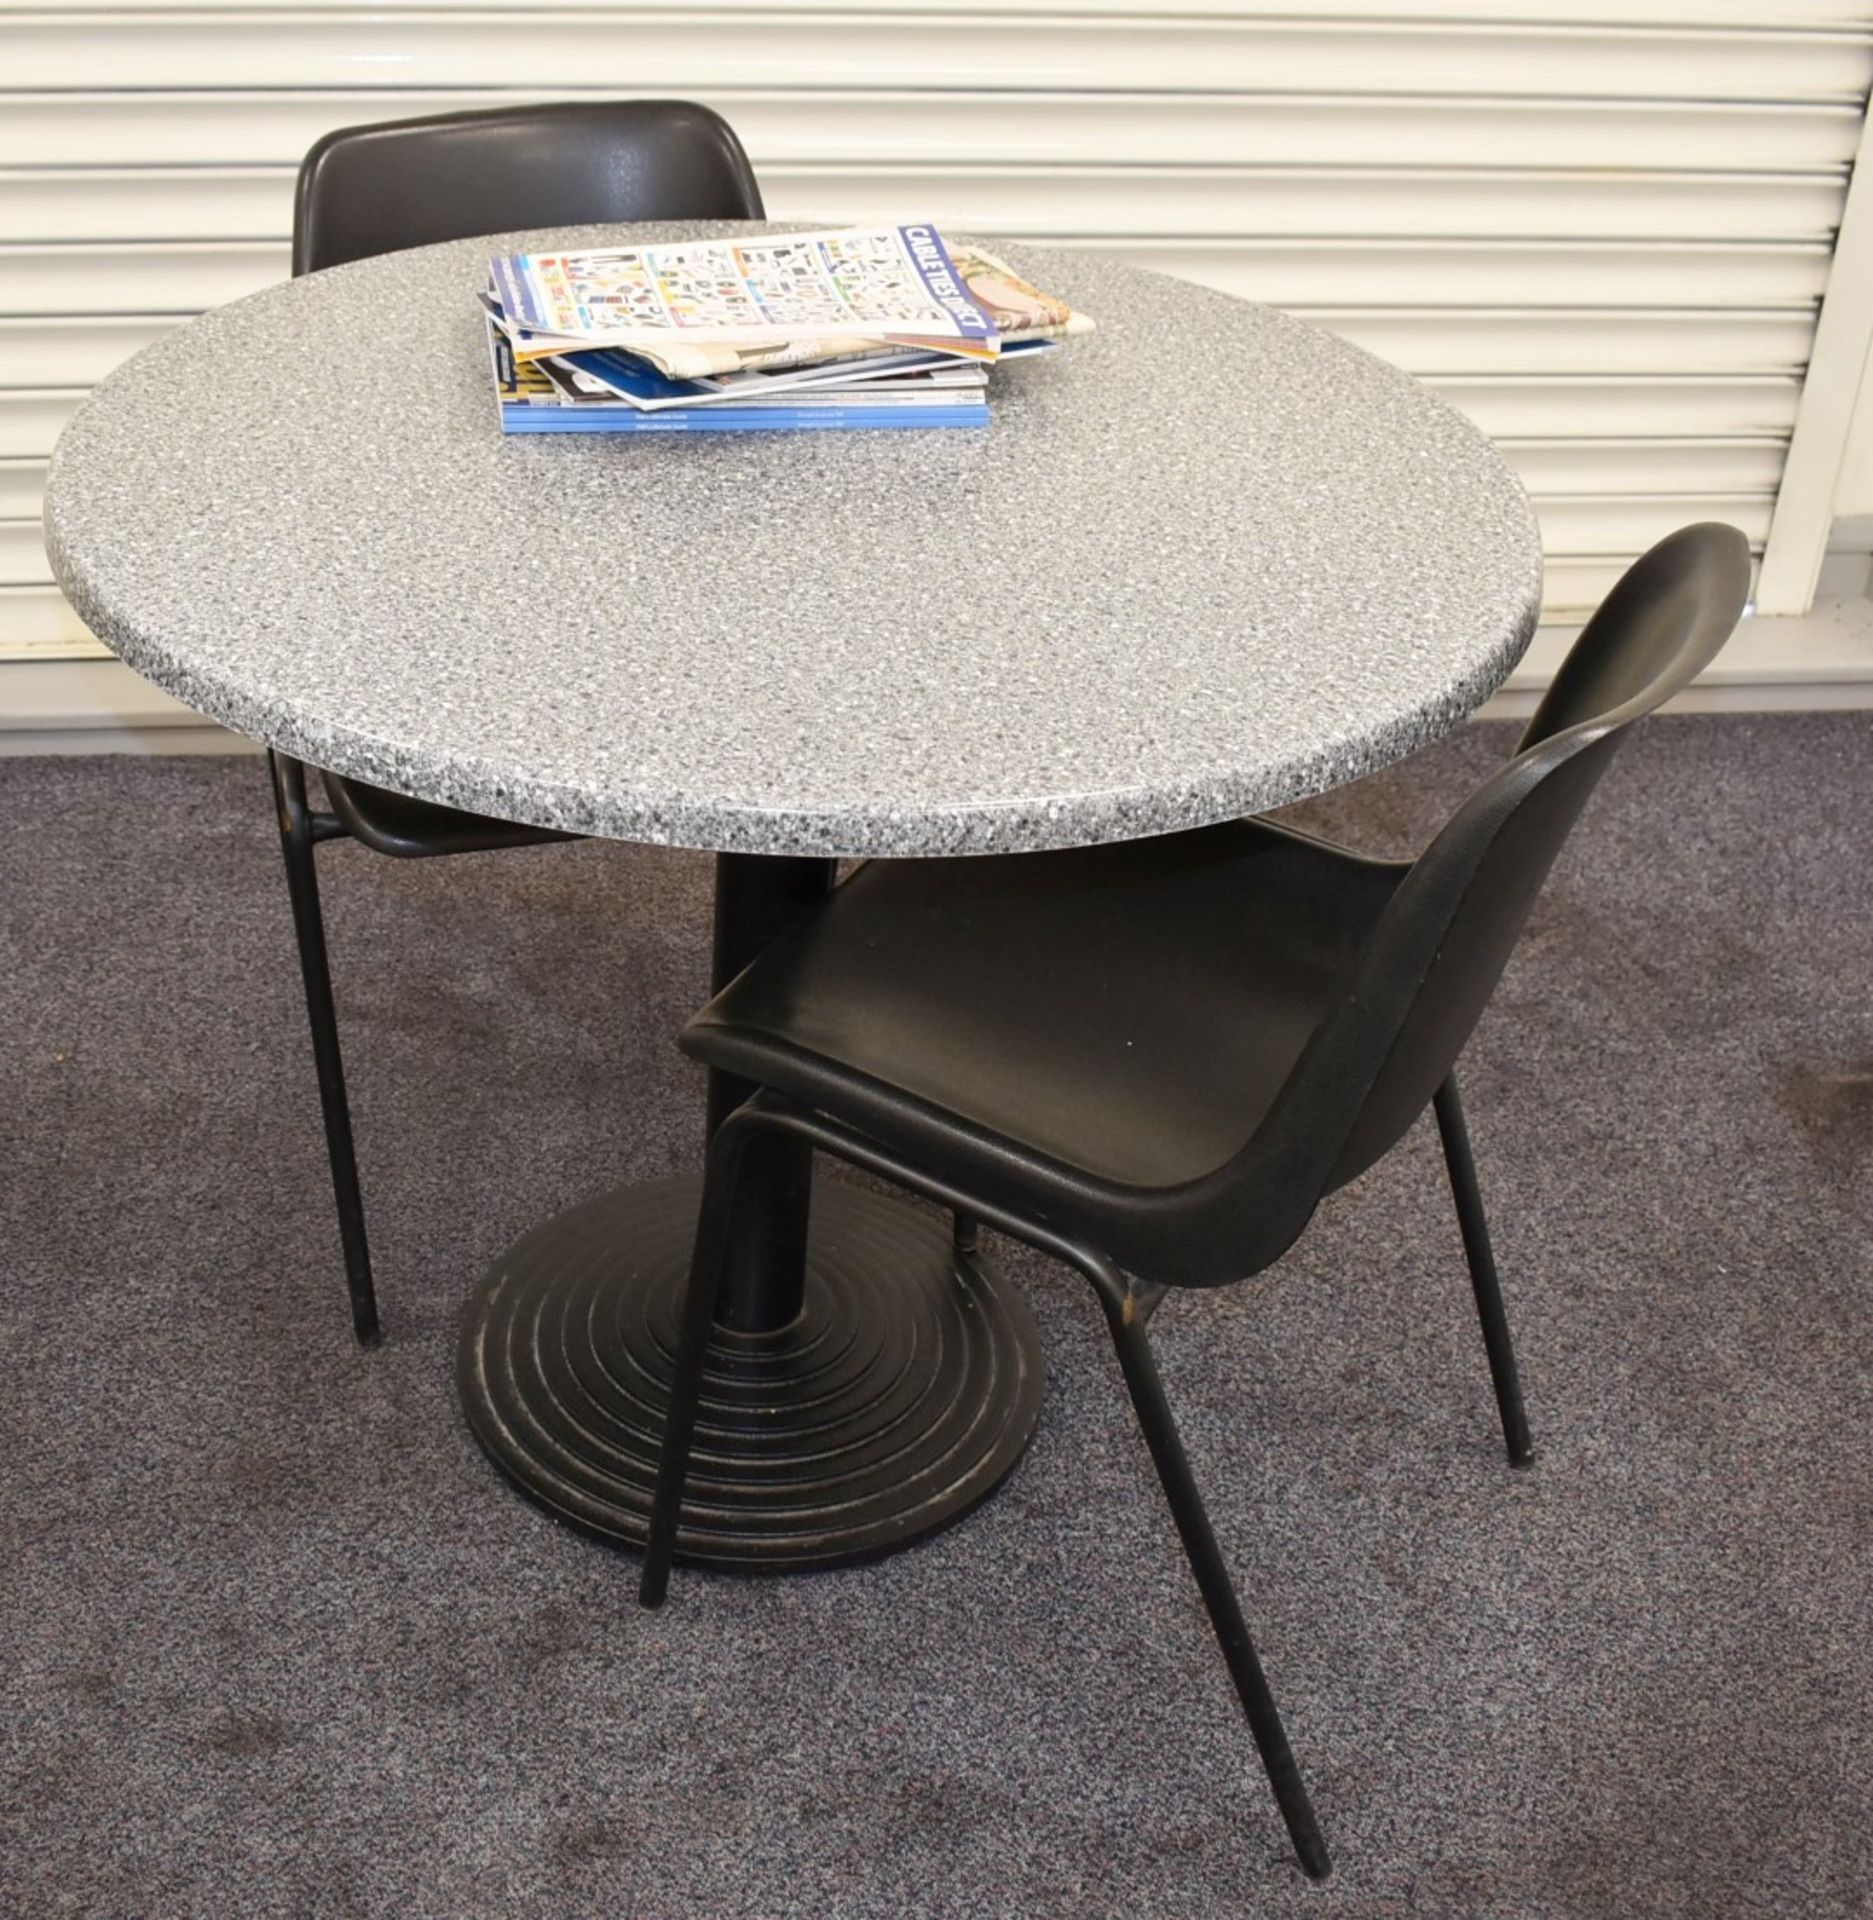 4 x Canteen Tables and 8 x Stackable Chairs - Granite Effect 90cm Table Tops With Cast Iron - Image 3 of 6